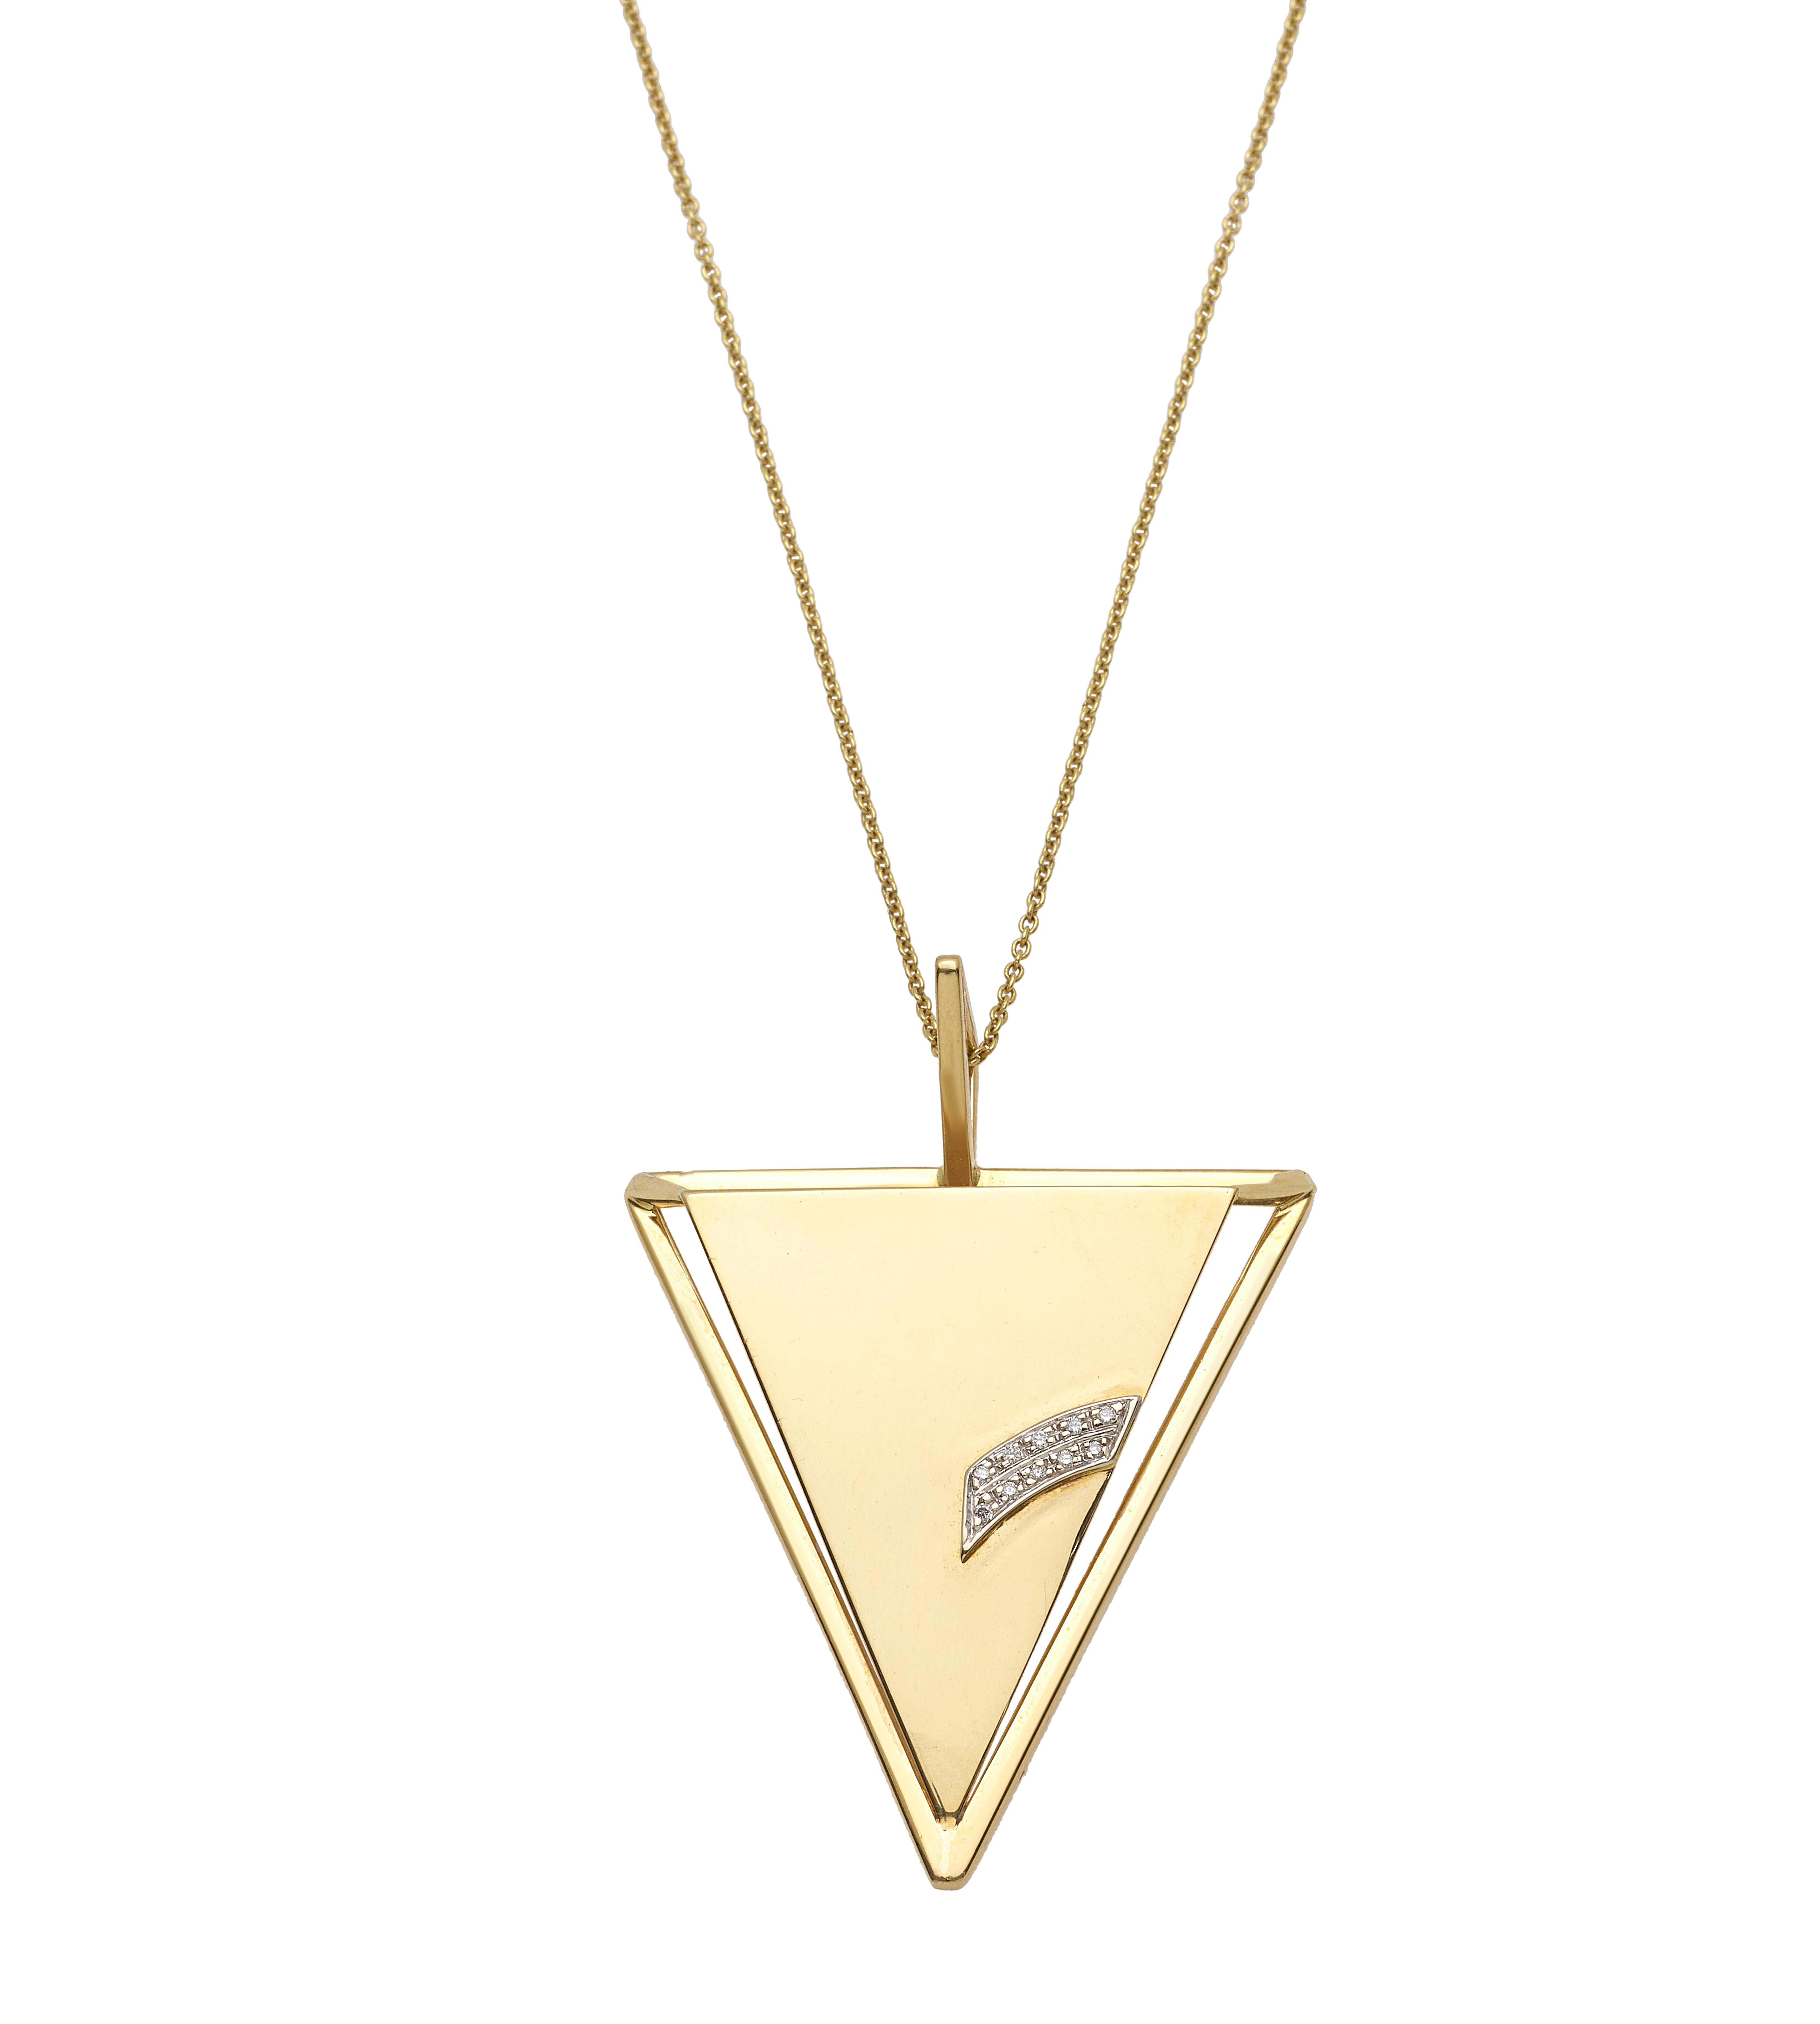 The necklace in 18kt yellow gold is a contemporary unique piece made by an artisan based in Naples. This stunning jewel mix the goldsmith jewellery tradition of Southern Italy together to past times inspired to a deco style.
The pendant in 18kt gold